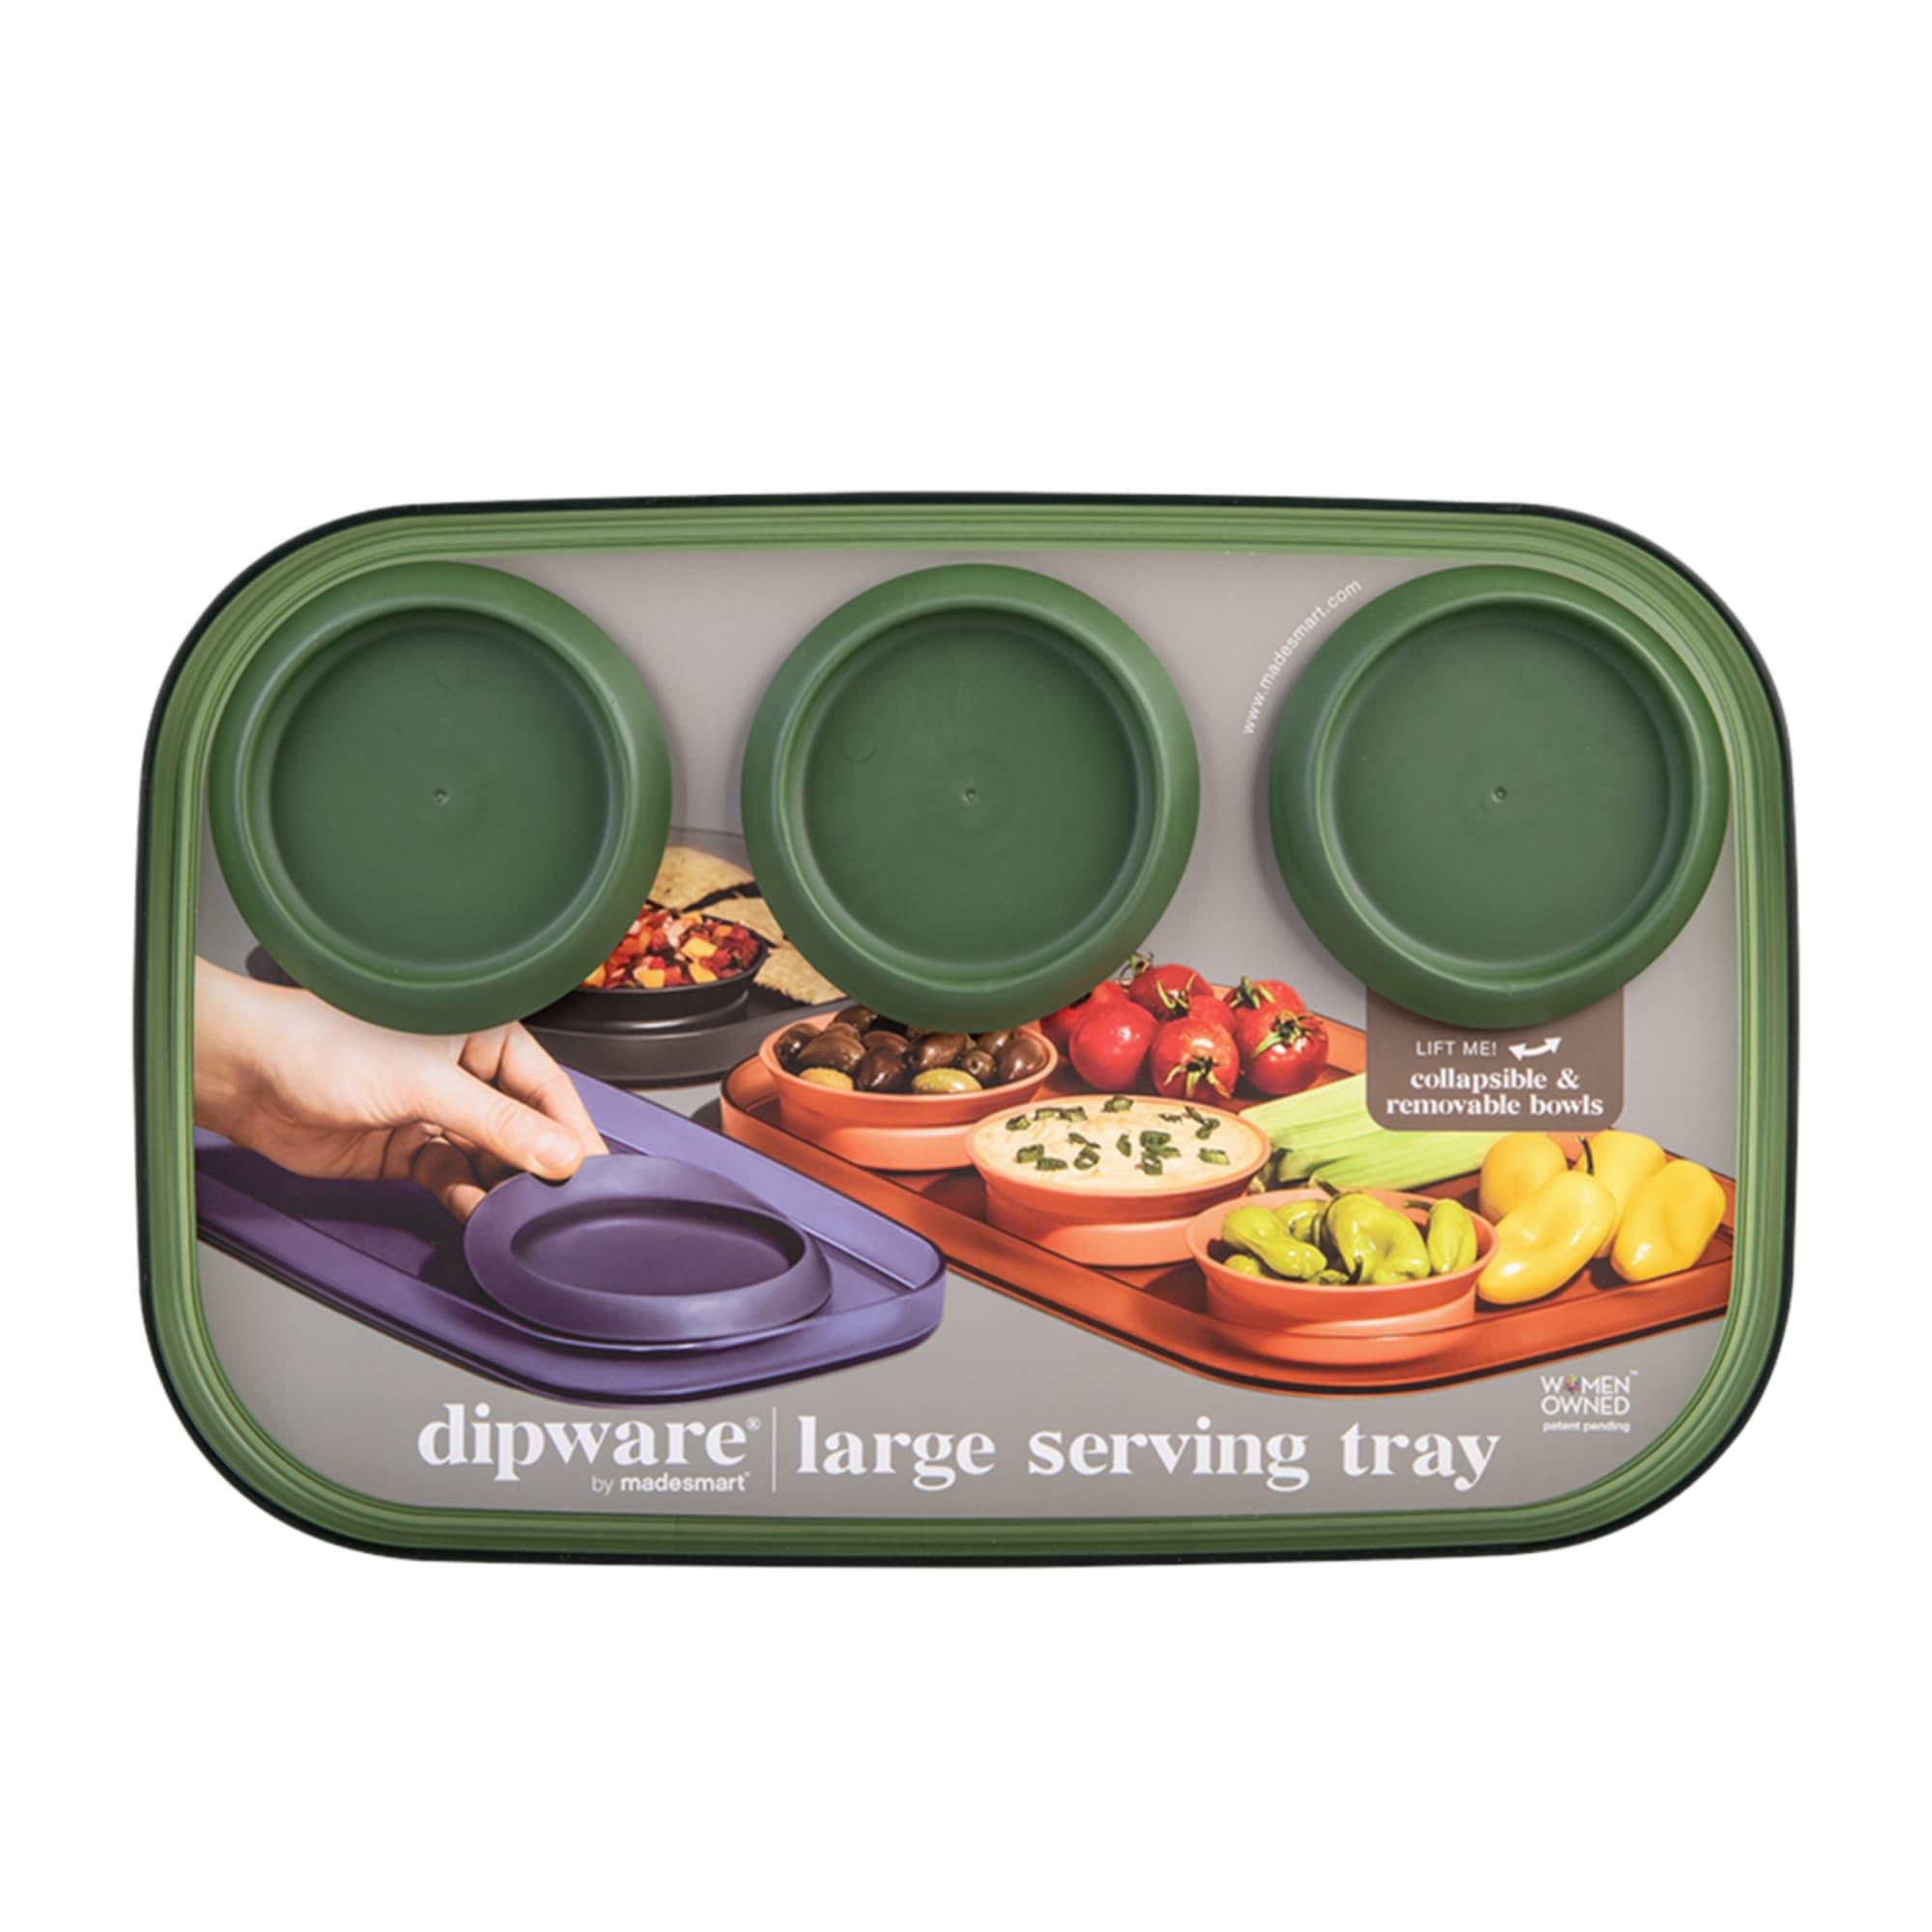 Madesmart Dipware Large Serving Tray with 3 Bowls Olive Green Image 3